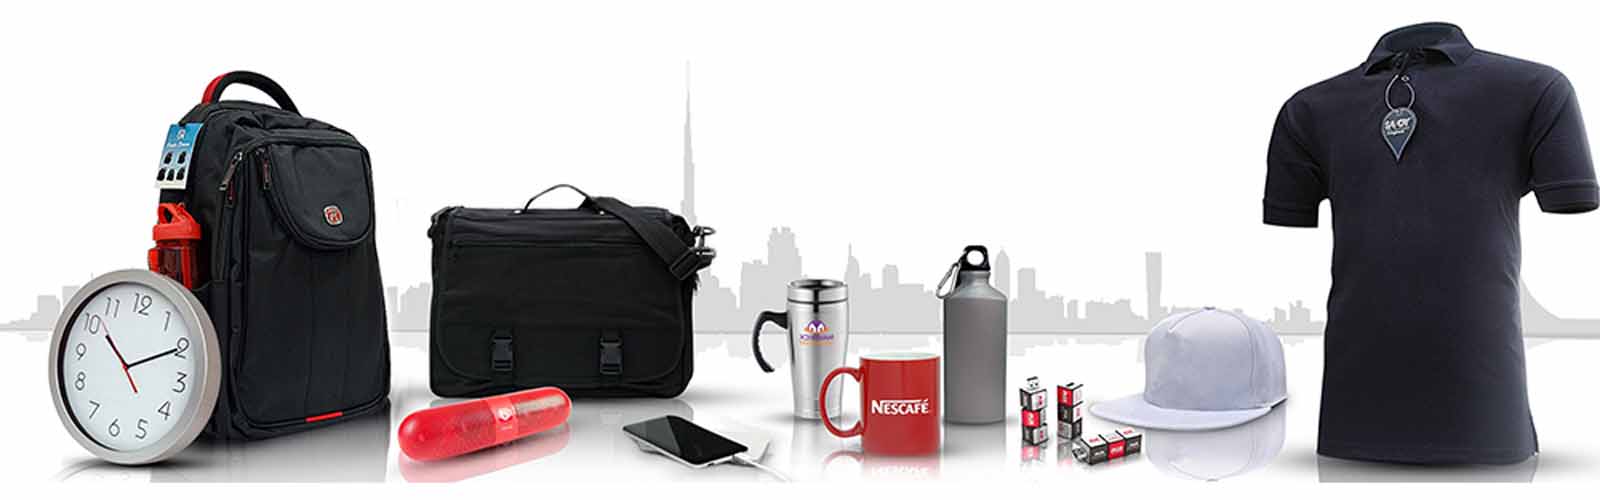 Corporate Gifts Bangalore, Corporate Gifts Suppliers in Bangalore.